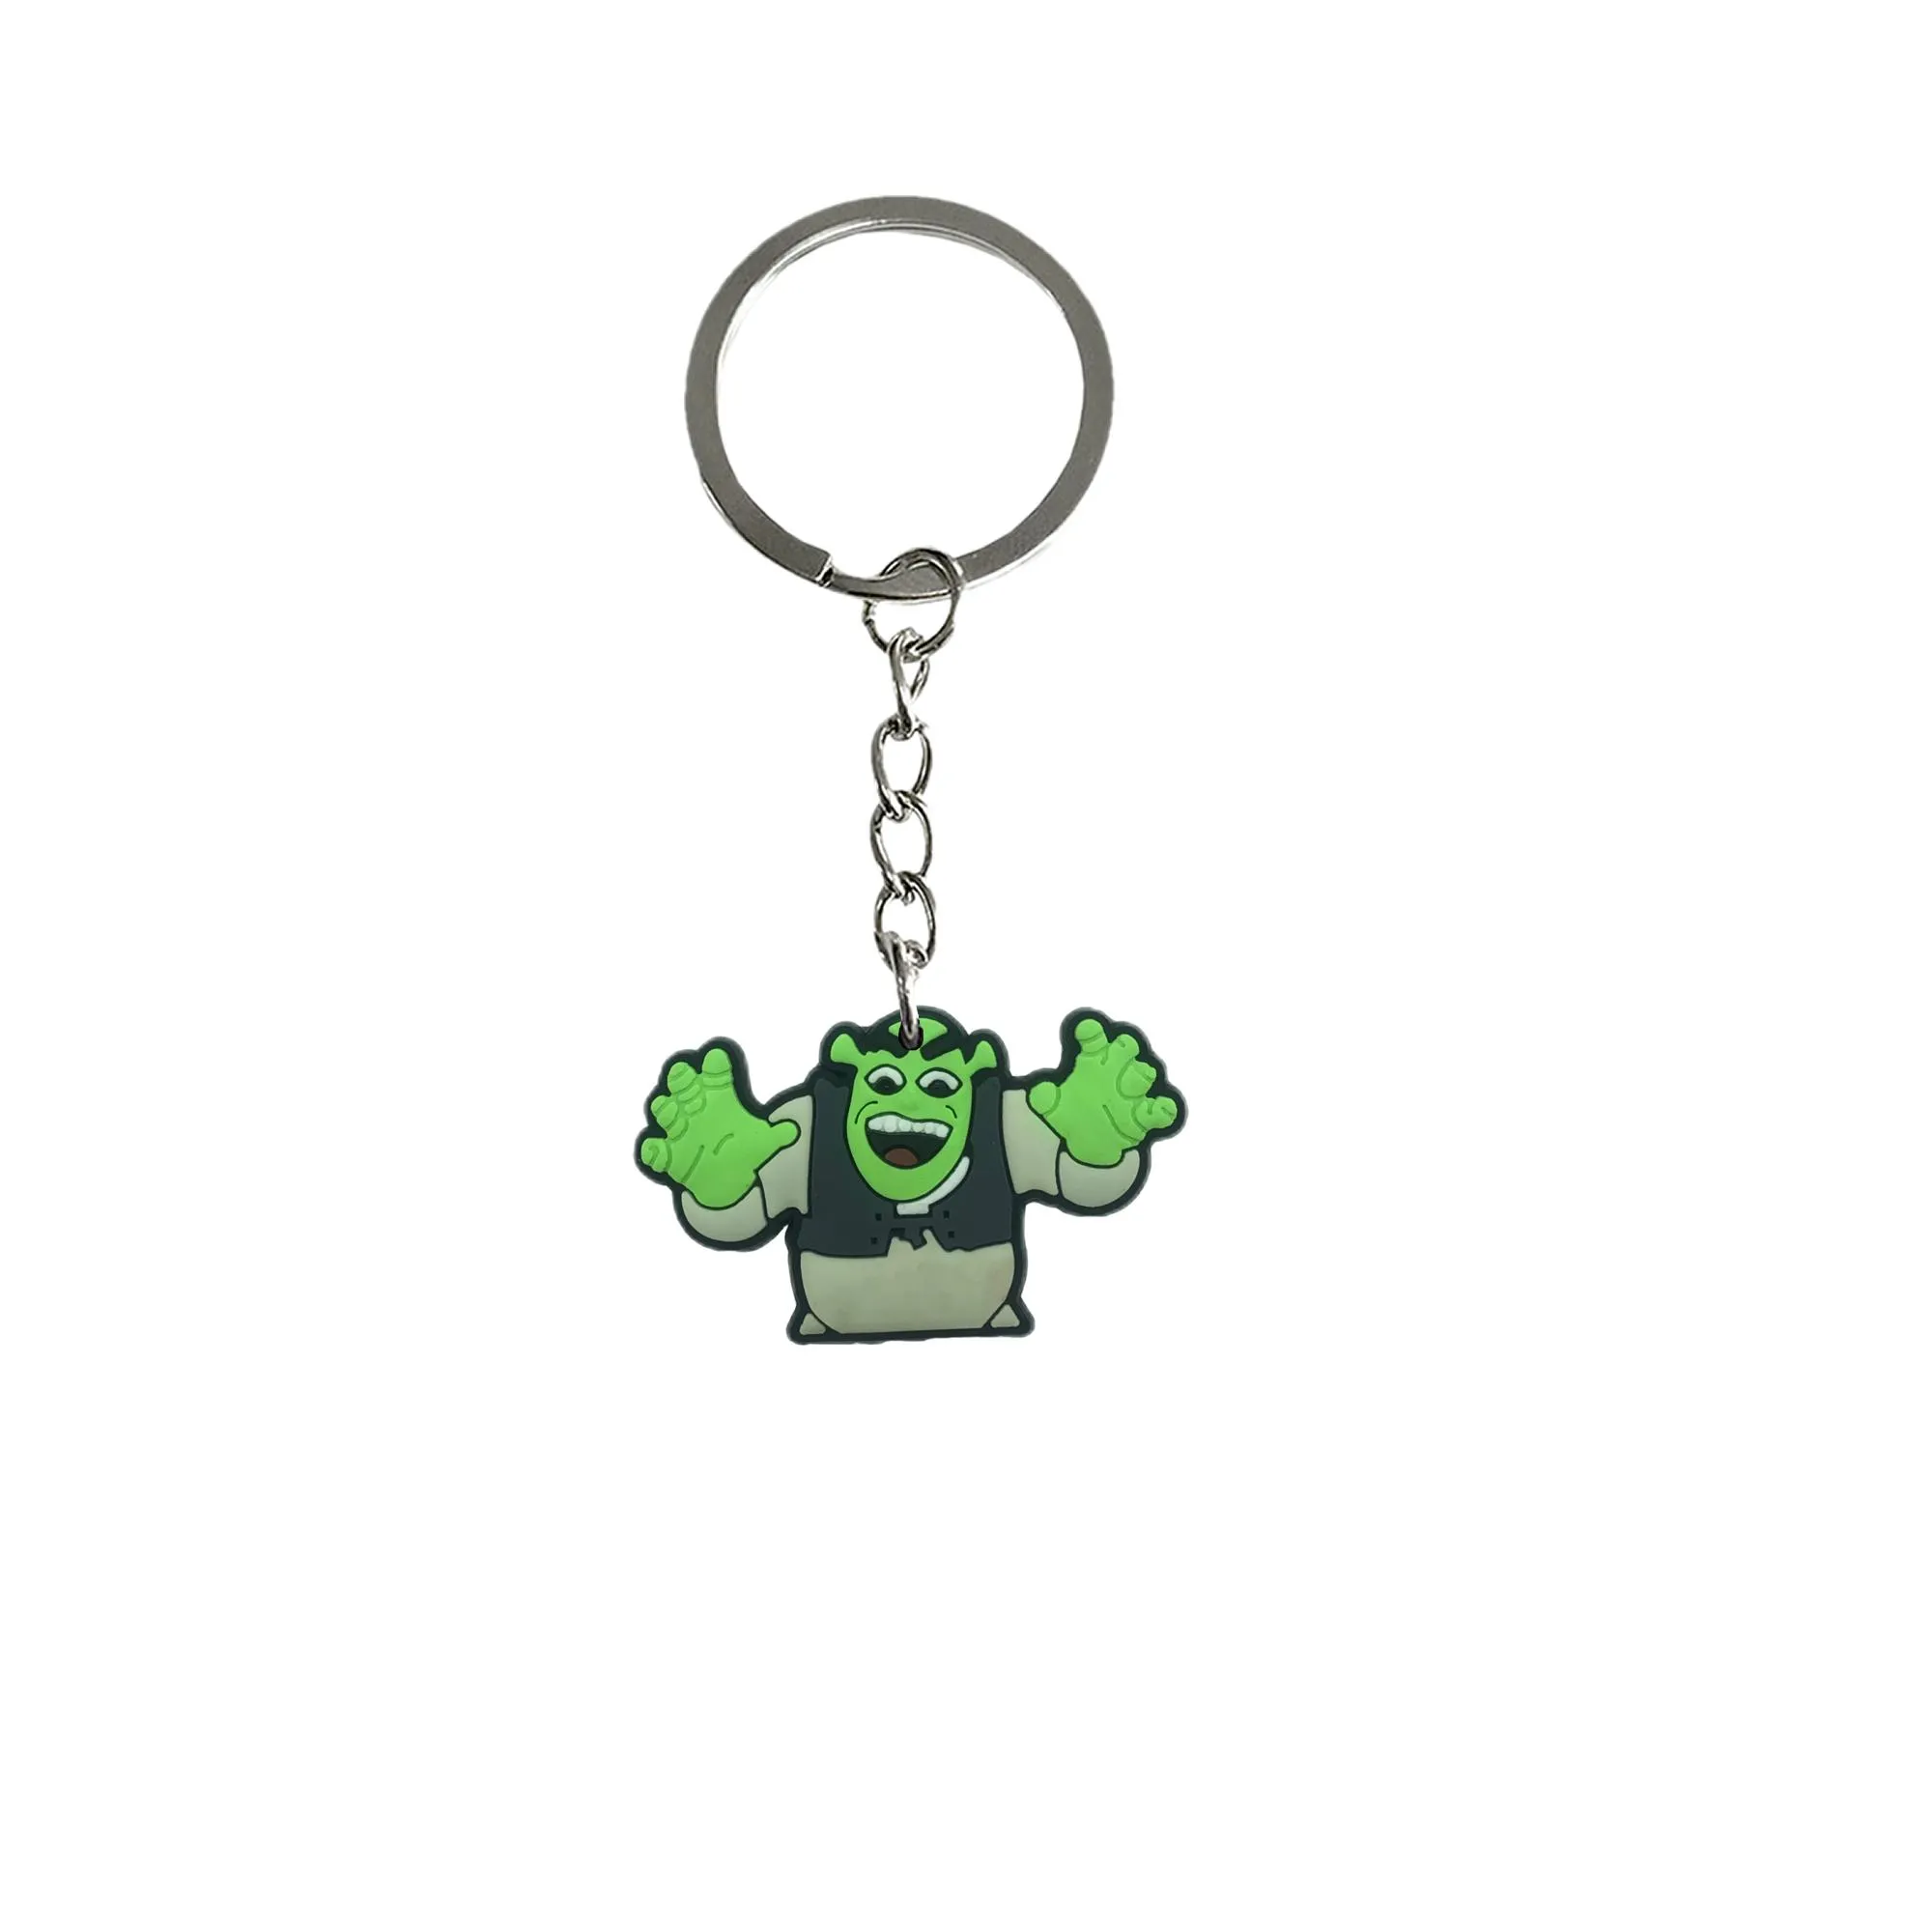 shrek keychain key chain for girls accessories backpack handbag and car gift valentines day ring christmas fans keyring suitable schoolbag classroom school birthday party supplies couple chains women men